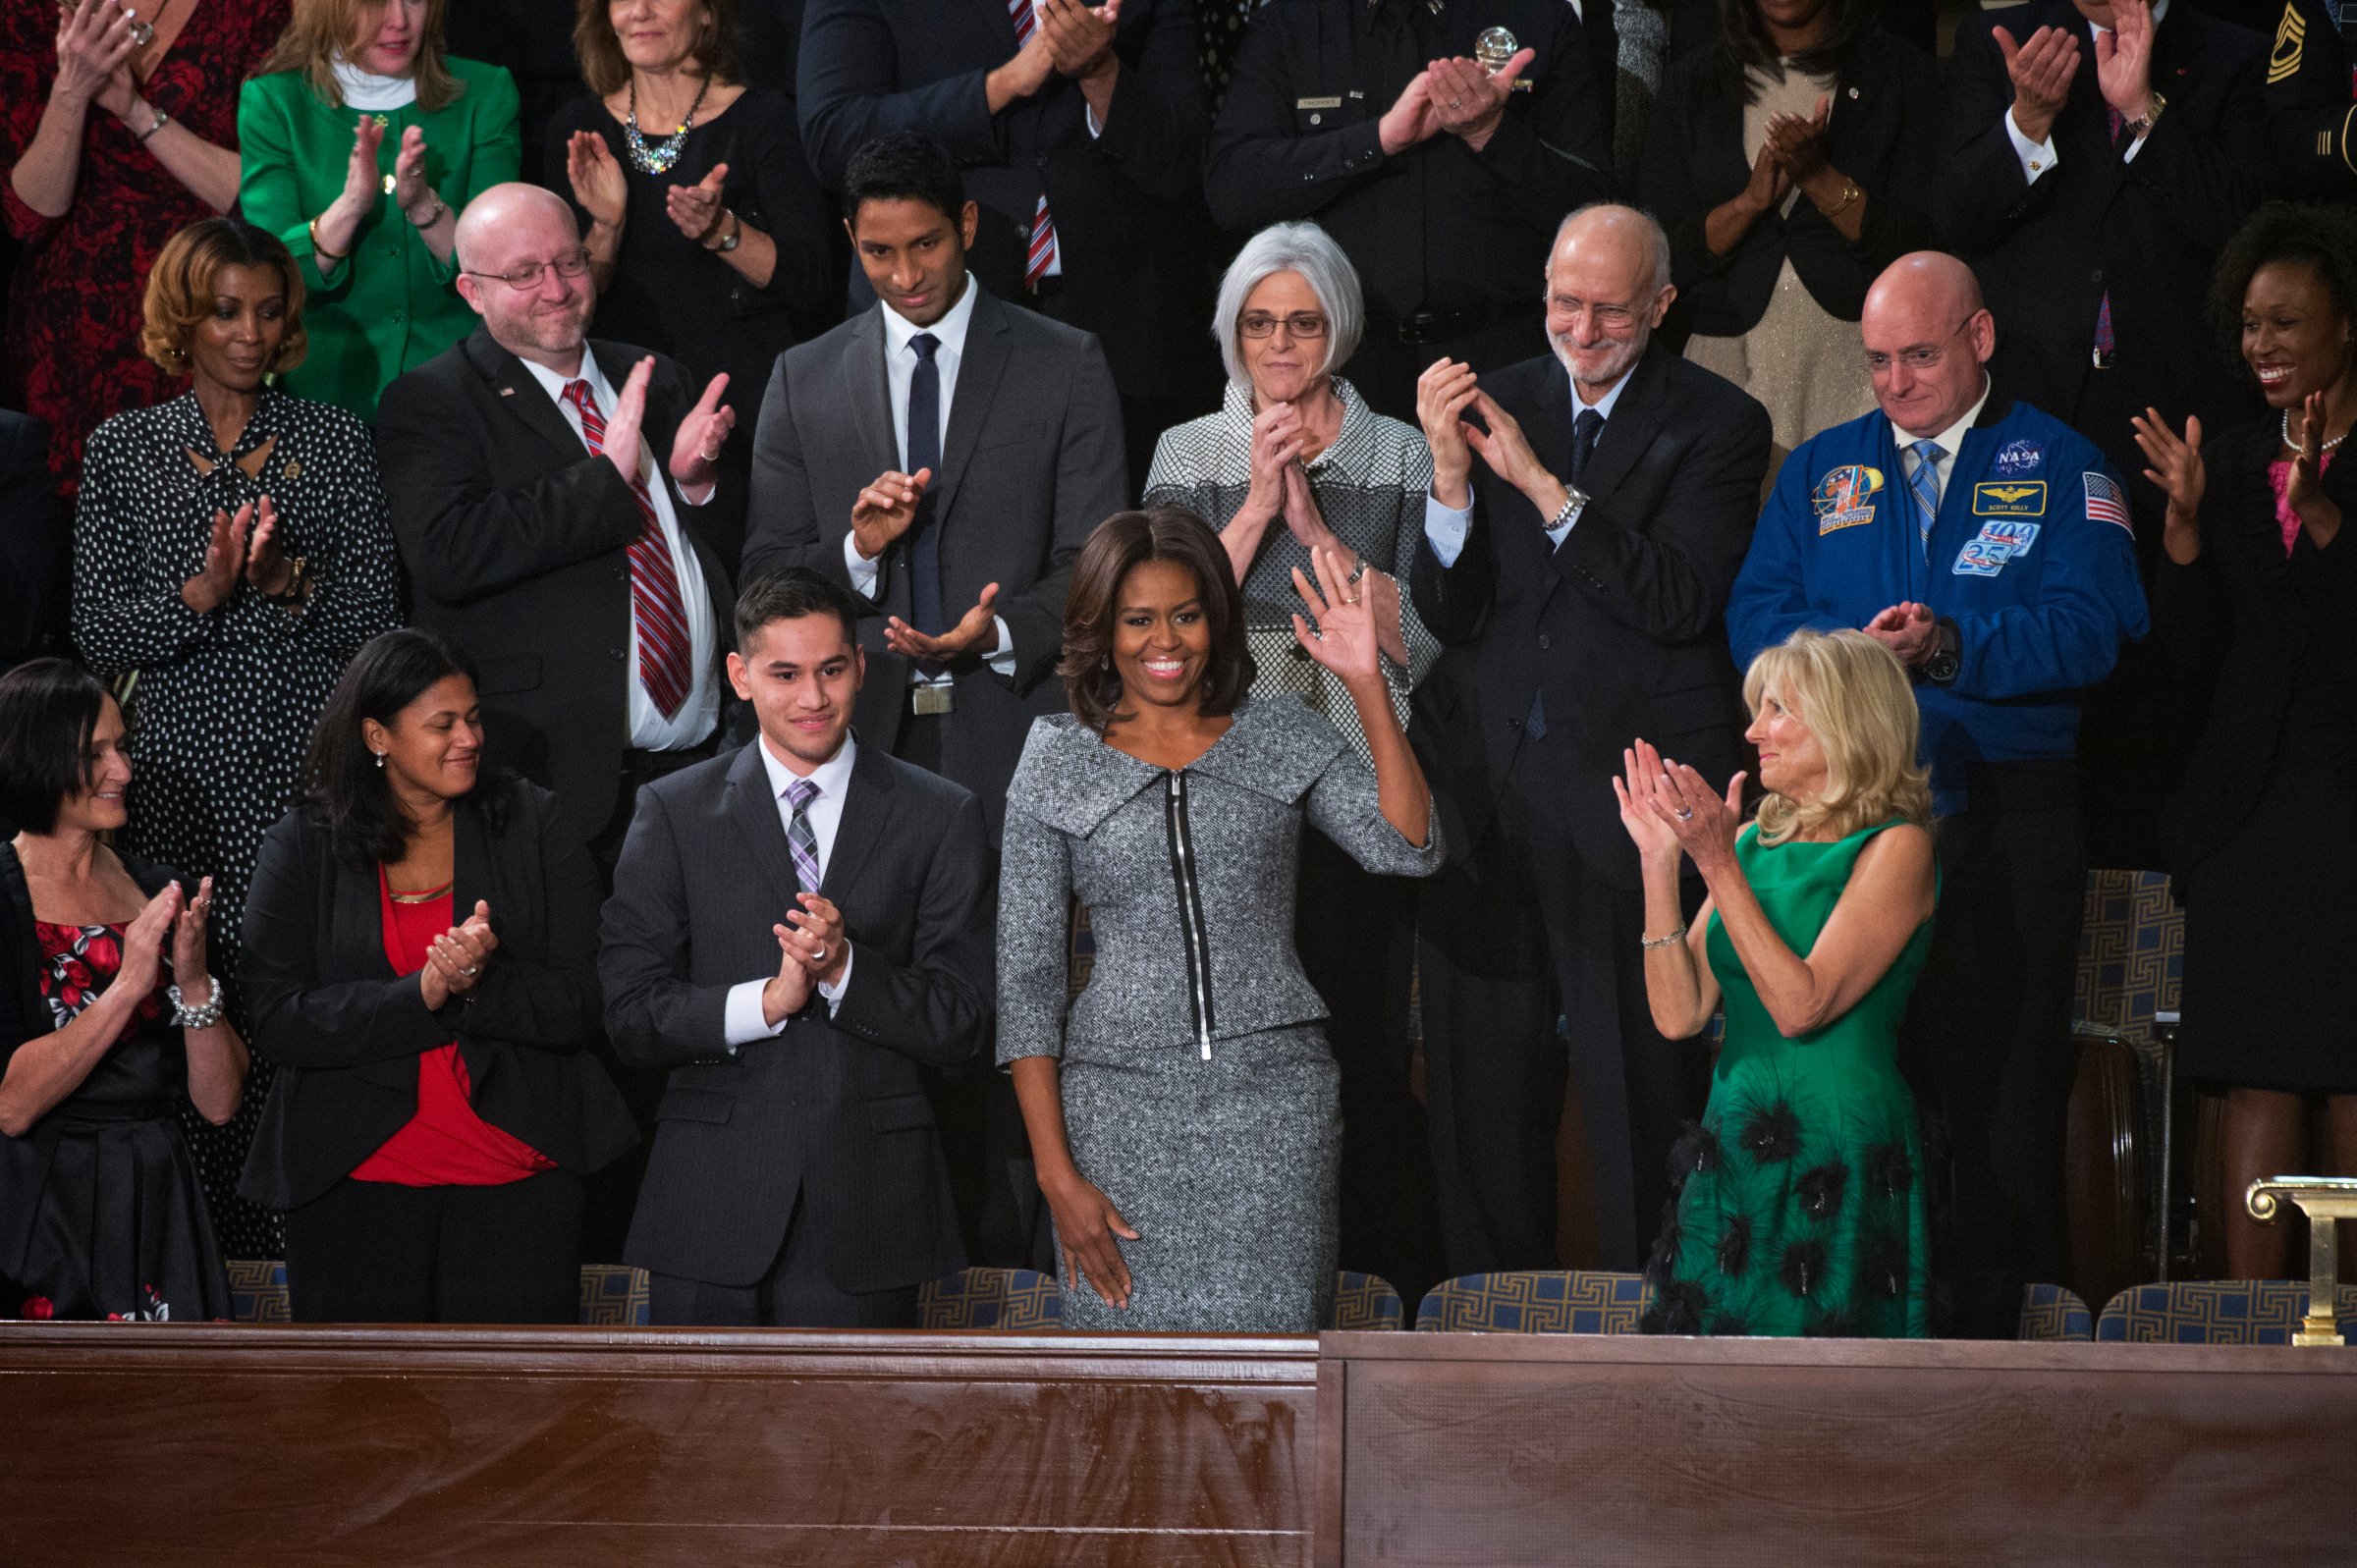 UNITED STATES - JANUARY 20: First Lady Michelle Obama arrives in the Capitol's House chamber before President Barack Obama's State of the Union address, January 20, 2015. Jill Biden, wife of Vice President Joe Biden, appears at right. (Photo By Tom Williams/CQ Roll Call)